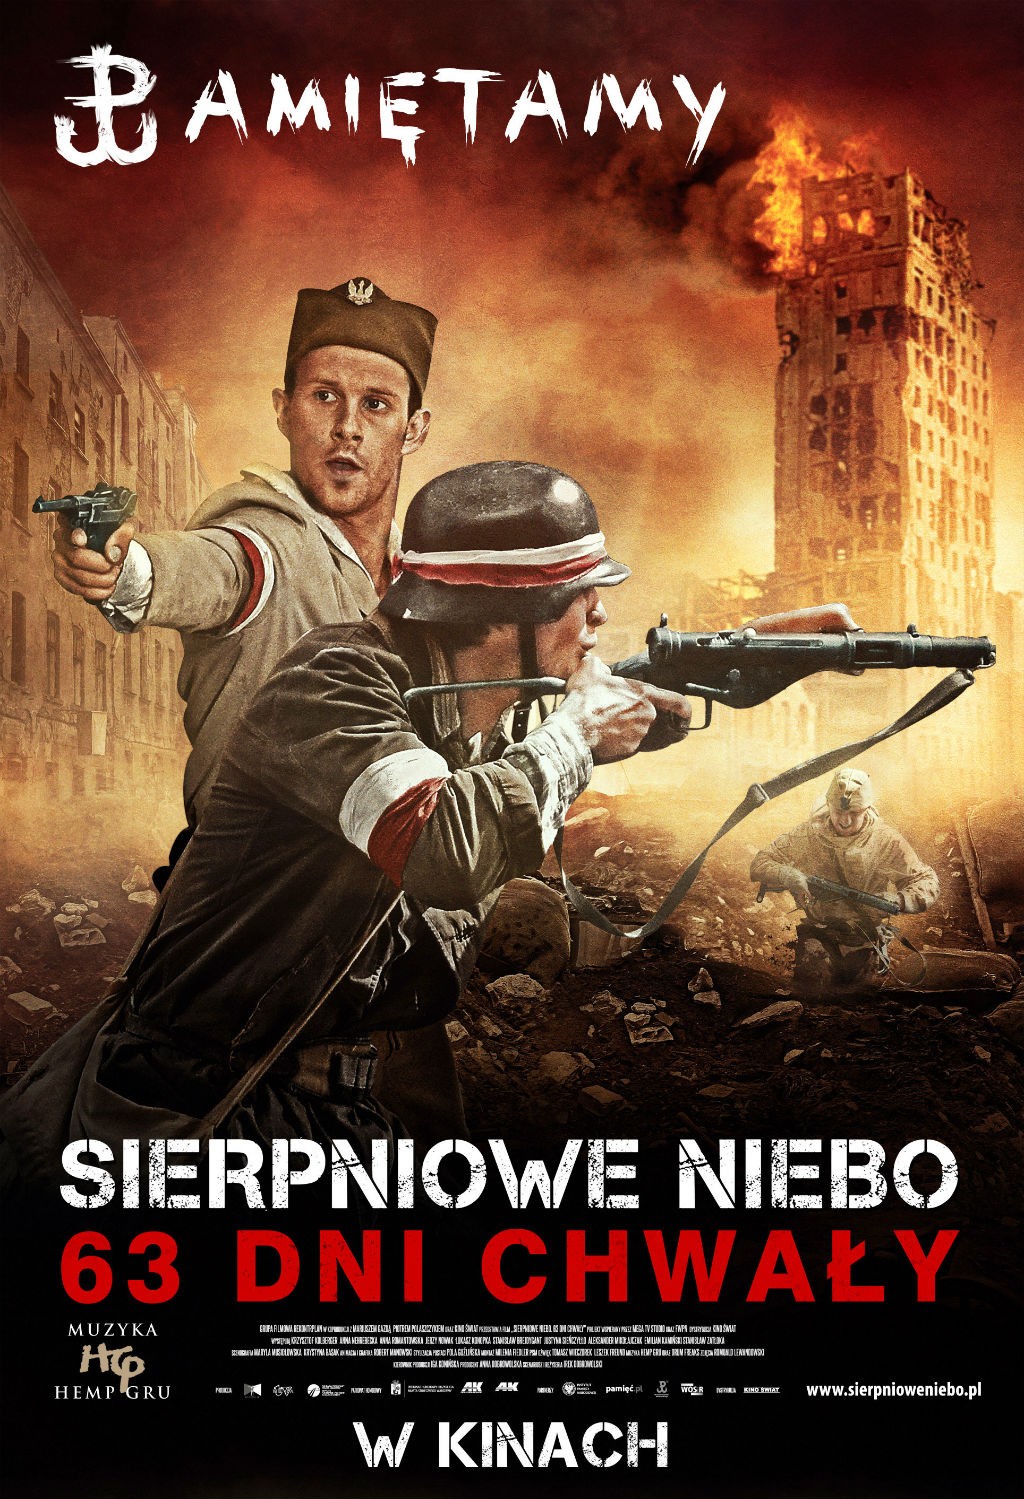 Extra Large Movie Poster Image for Sierpniowe niebo. 63 dni chwaly (#2 of 2)